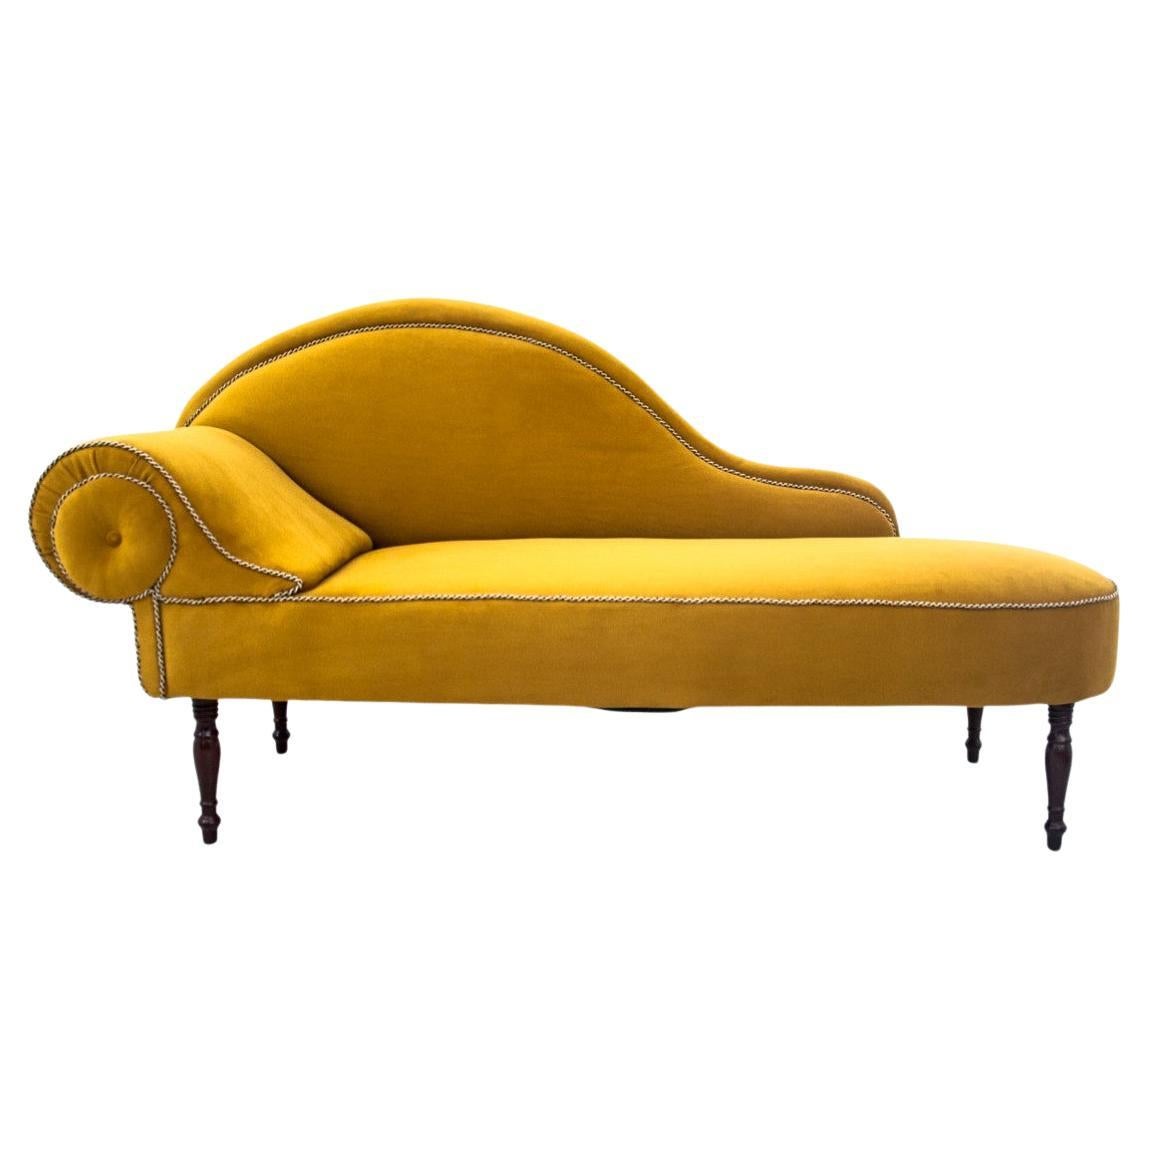 Unique yellow chaise longue, Northern Europe, circa 1900